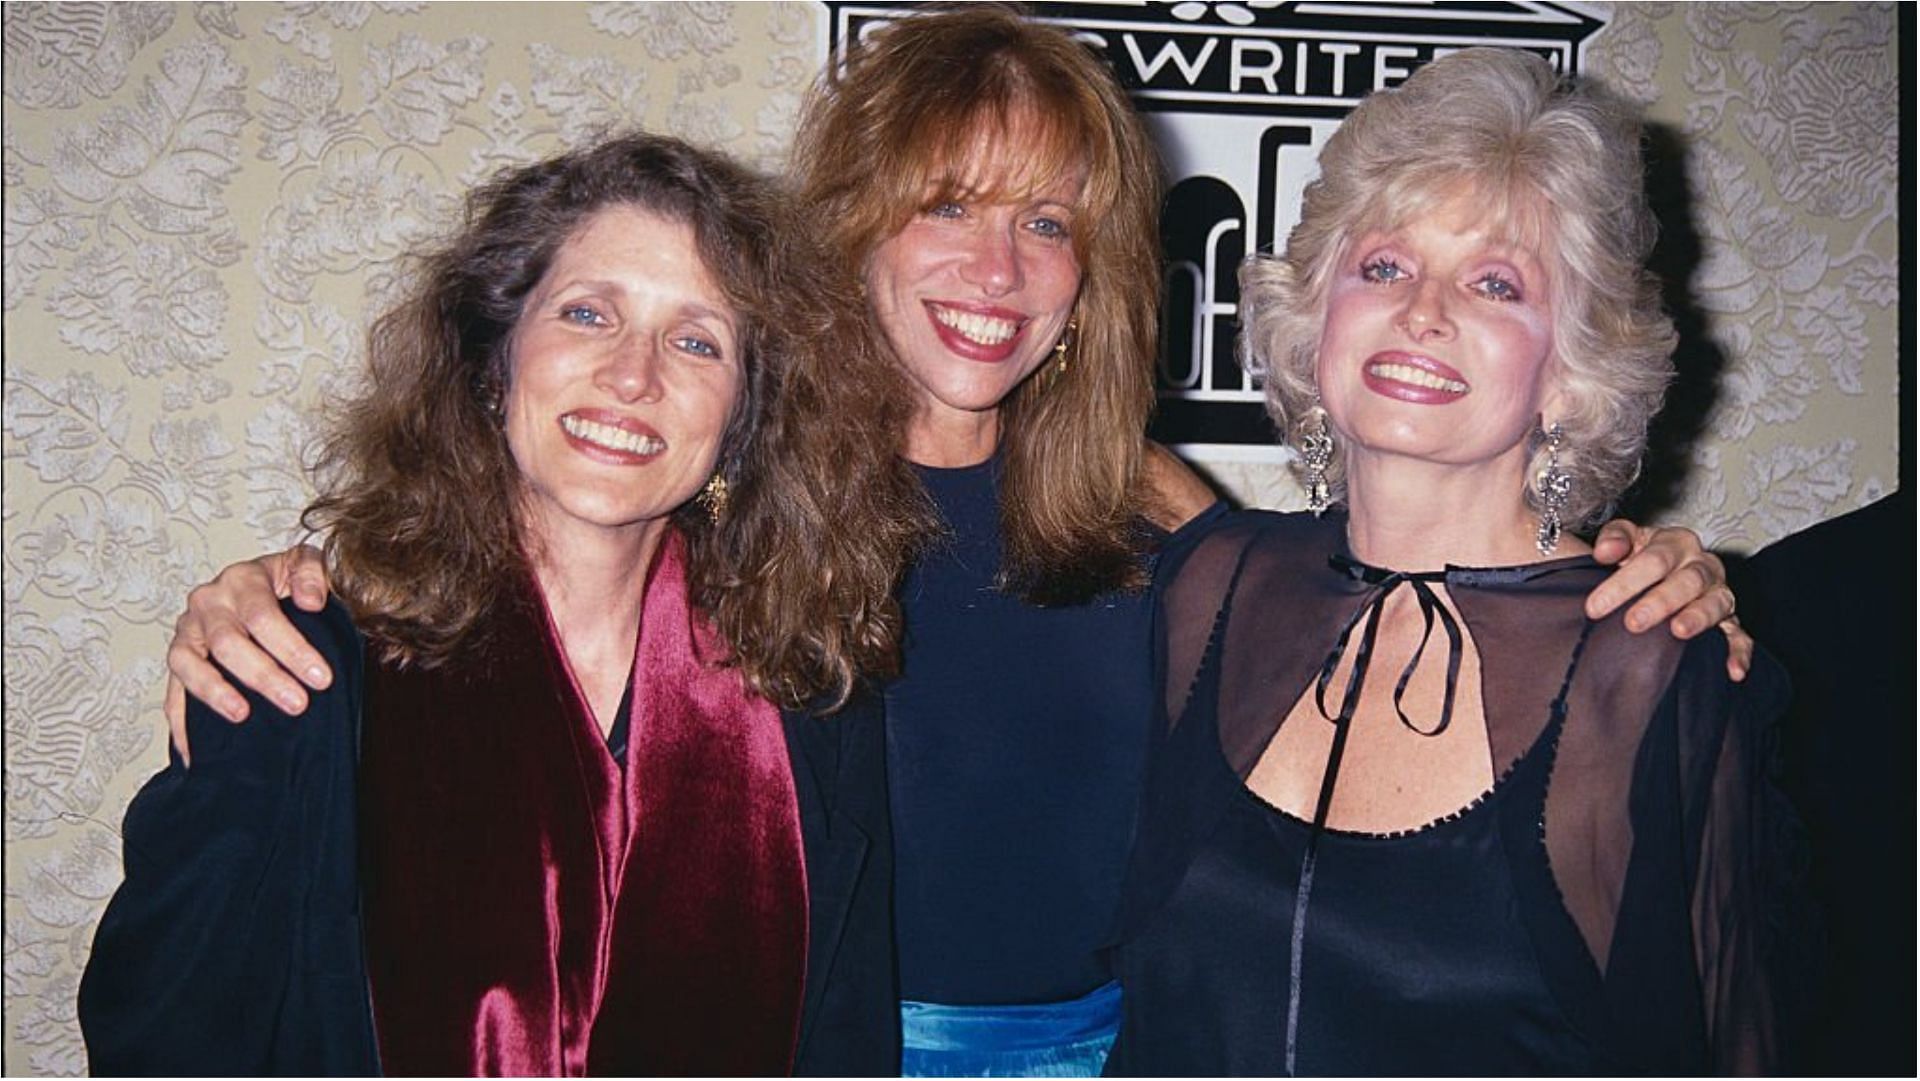 Carly Simon recently lost her two sisters, Lucy and Joanna (Image via Mitchell Gerber/Getty Images)